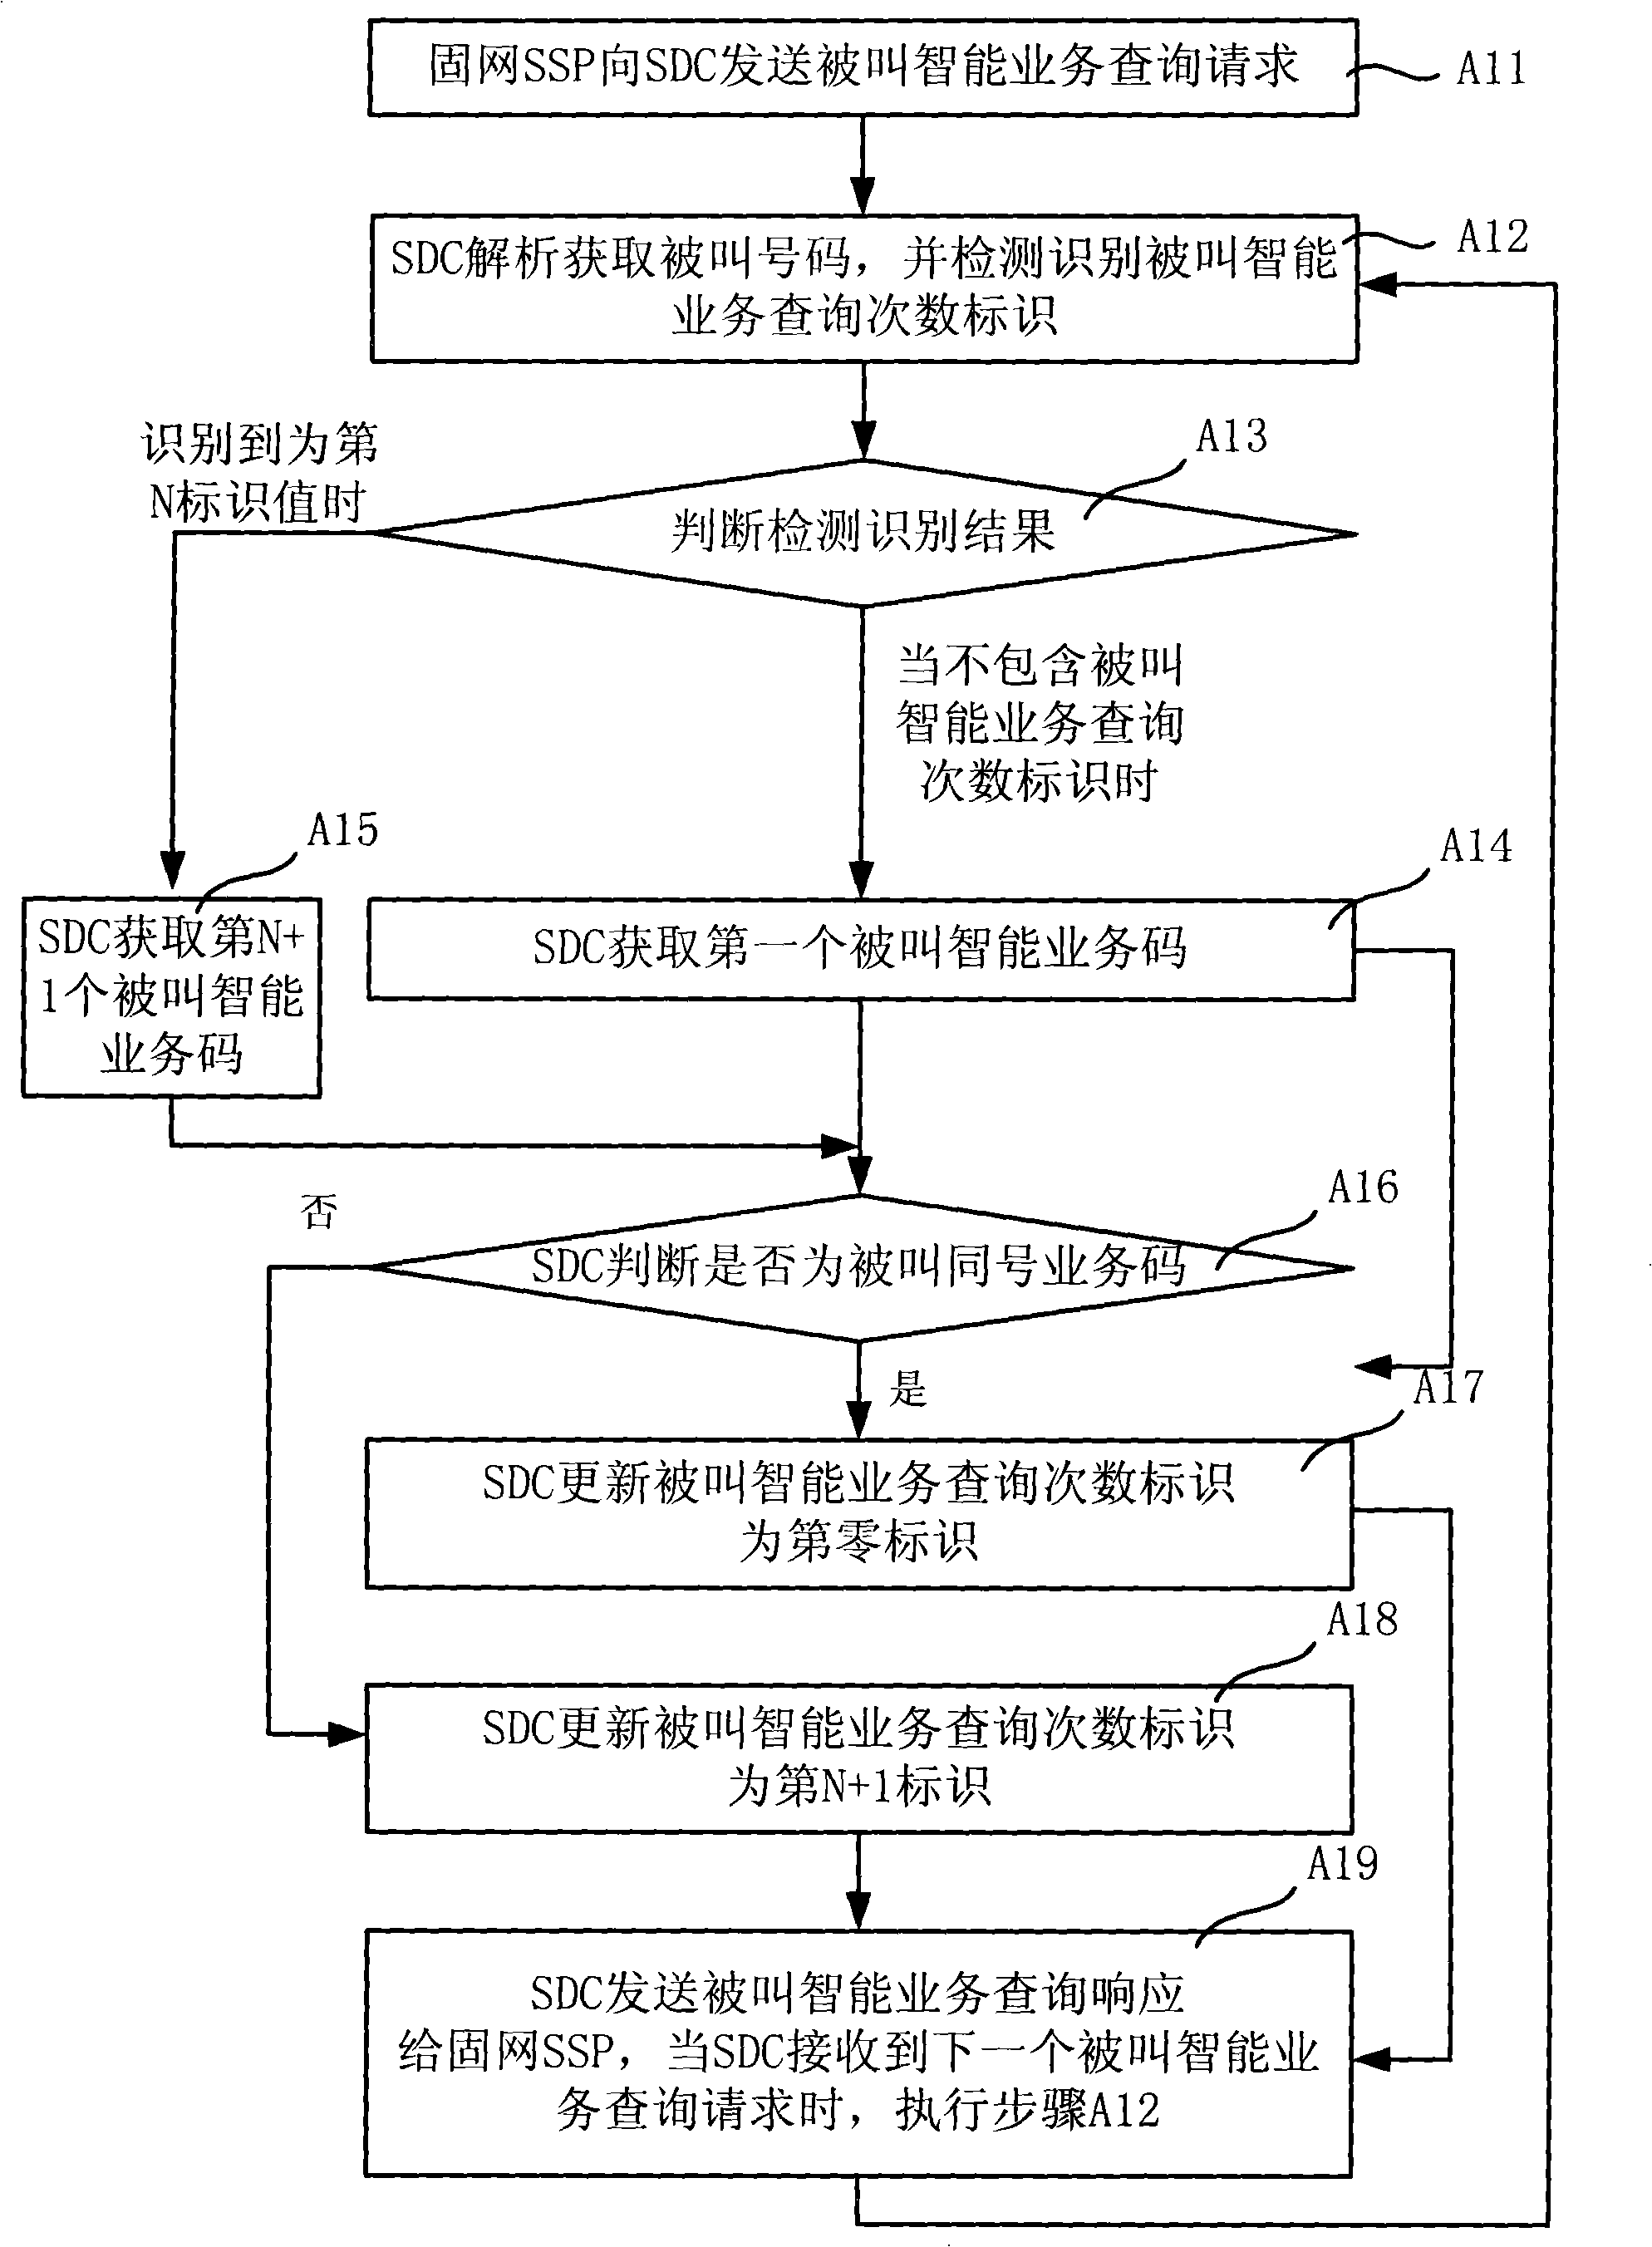 Method and system for implementing speech called service and calling service